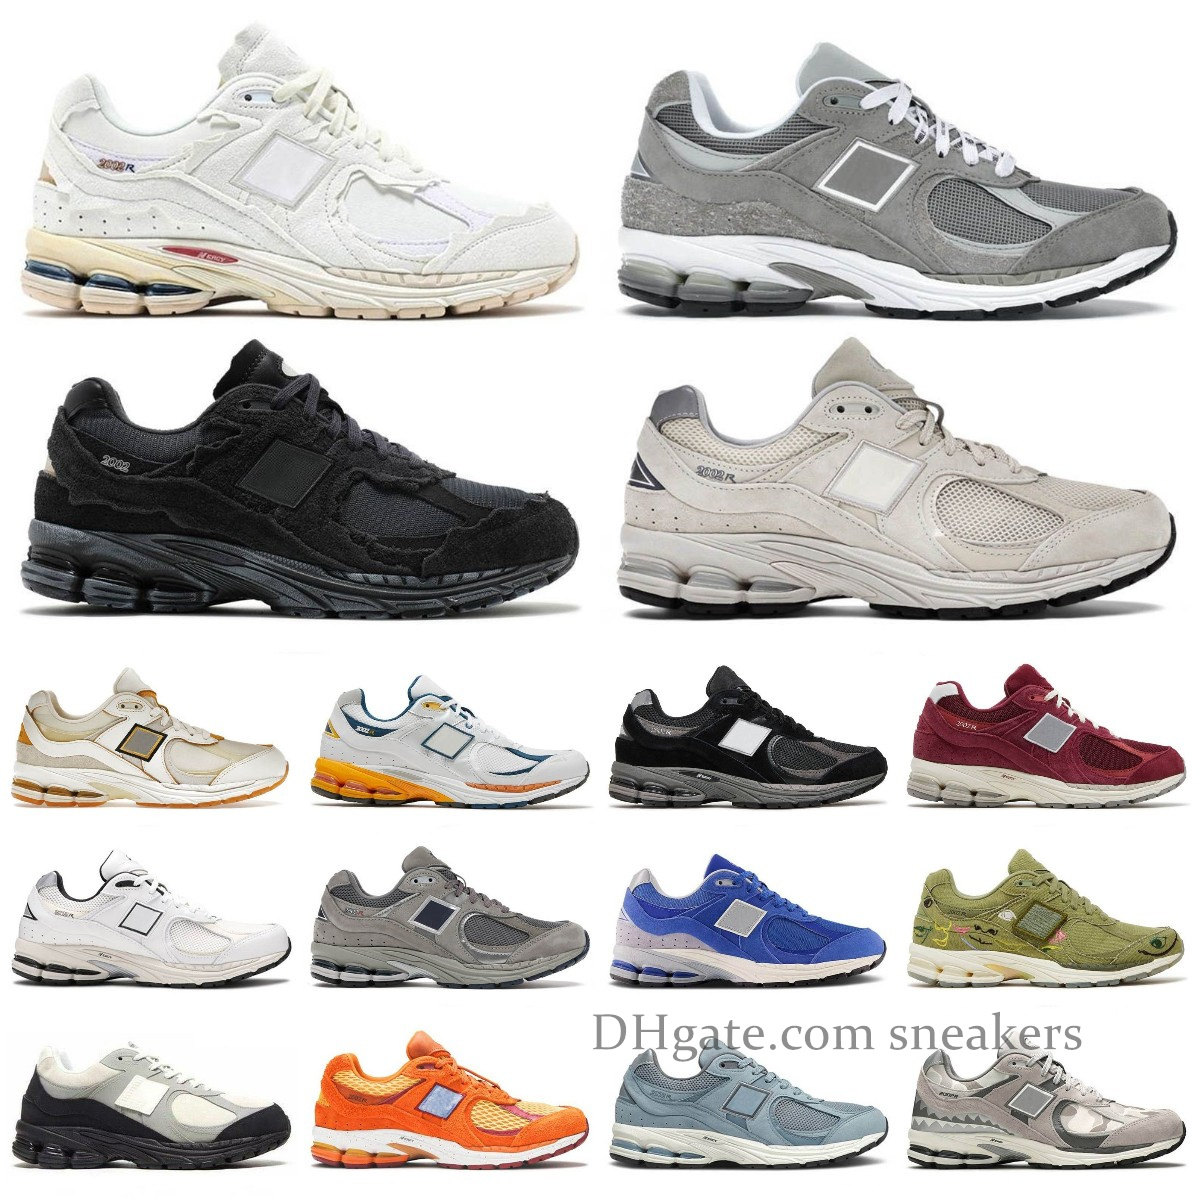 2002R Casual Shoes Protection Pack Llove on Cloud Phantom Designer Athletic Athletics Athletics Athletic